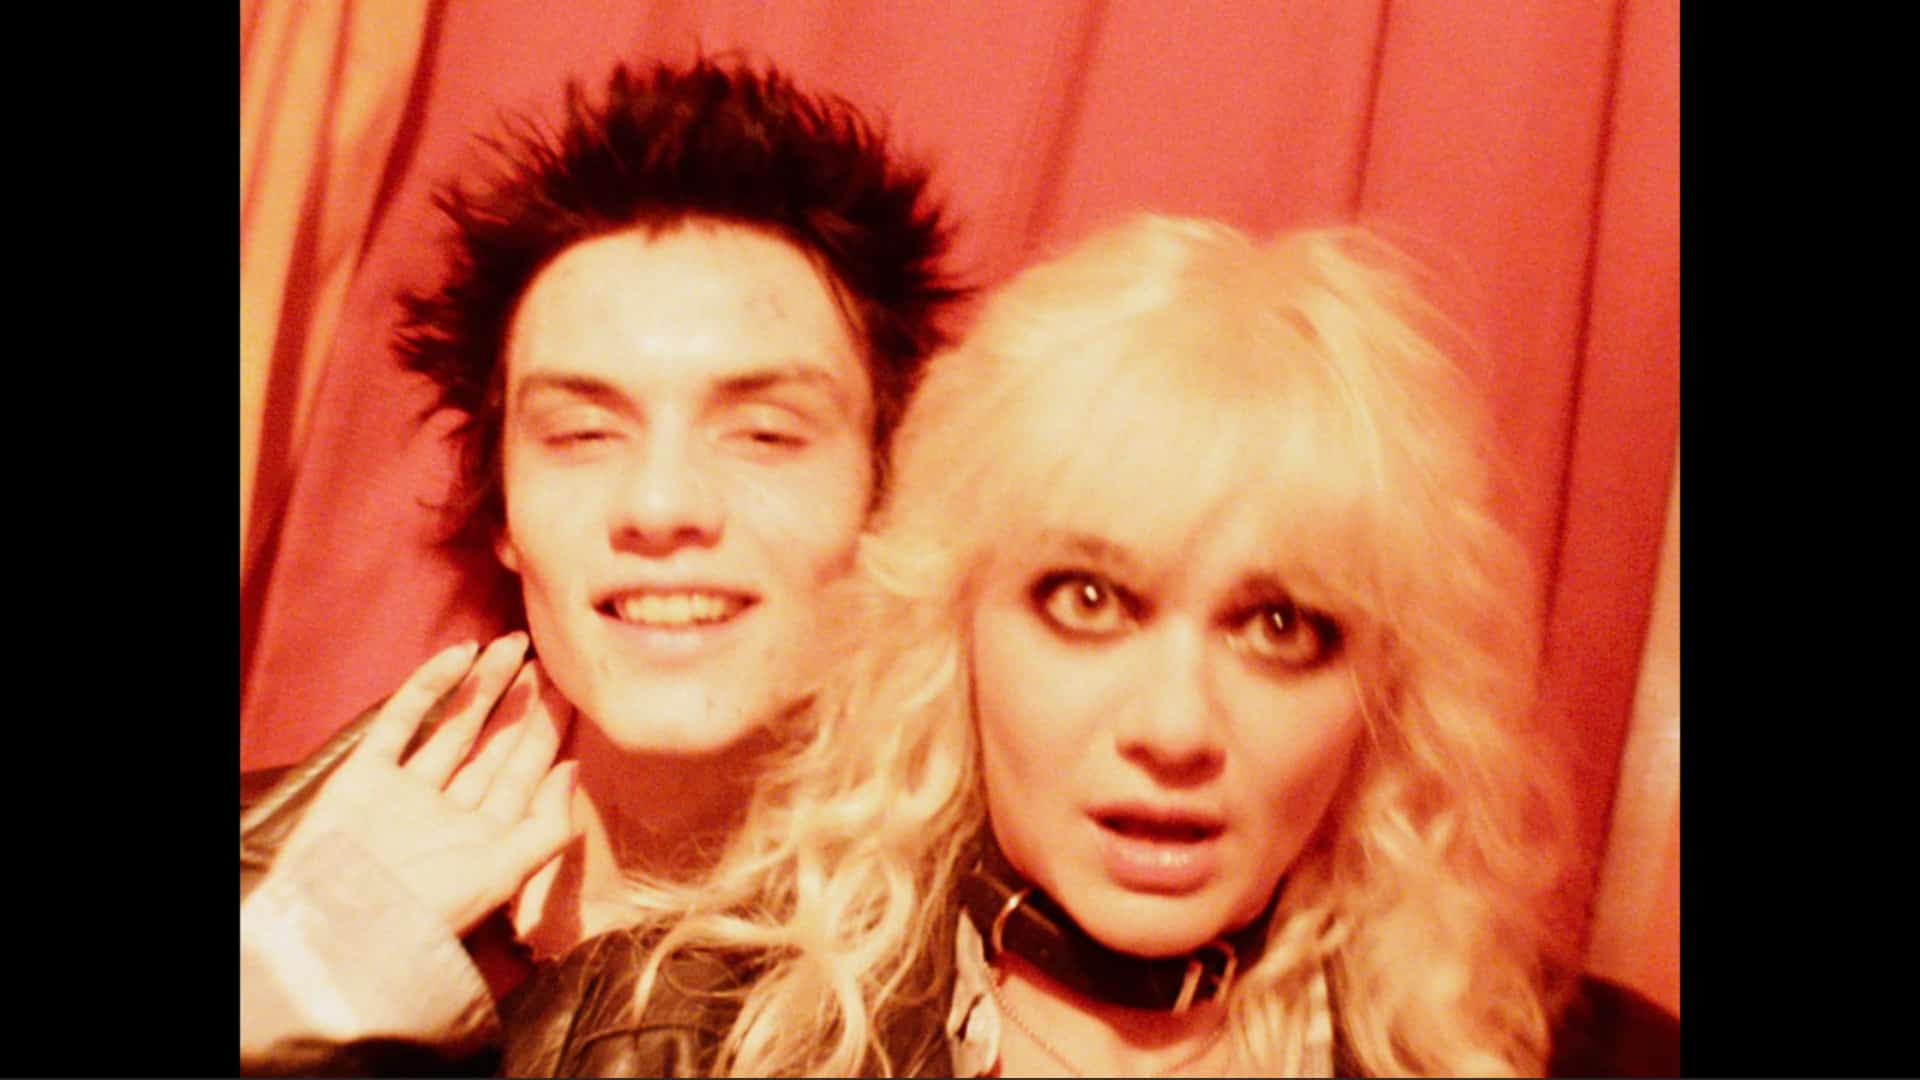 Sid Vicious (Louis Partridge) and Nancy taking a picture